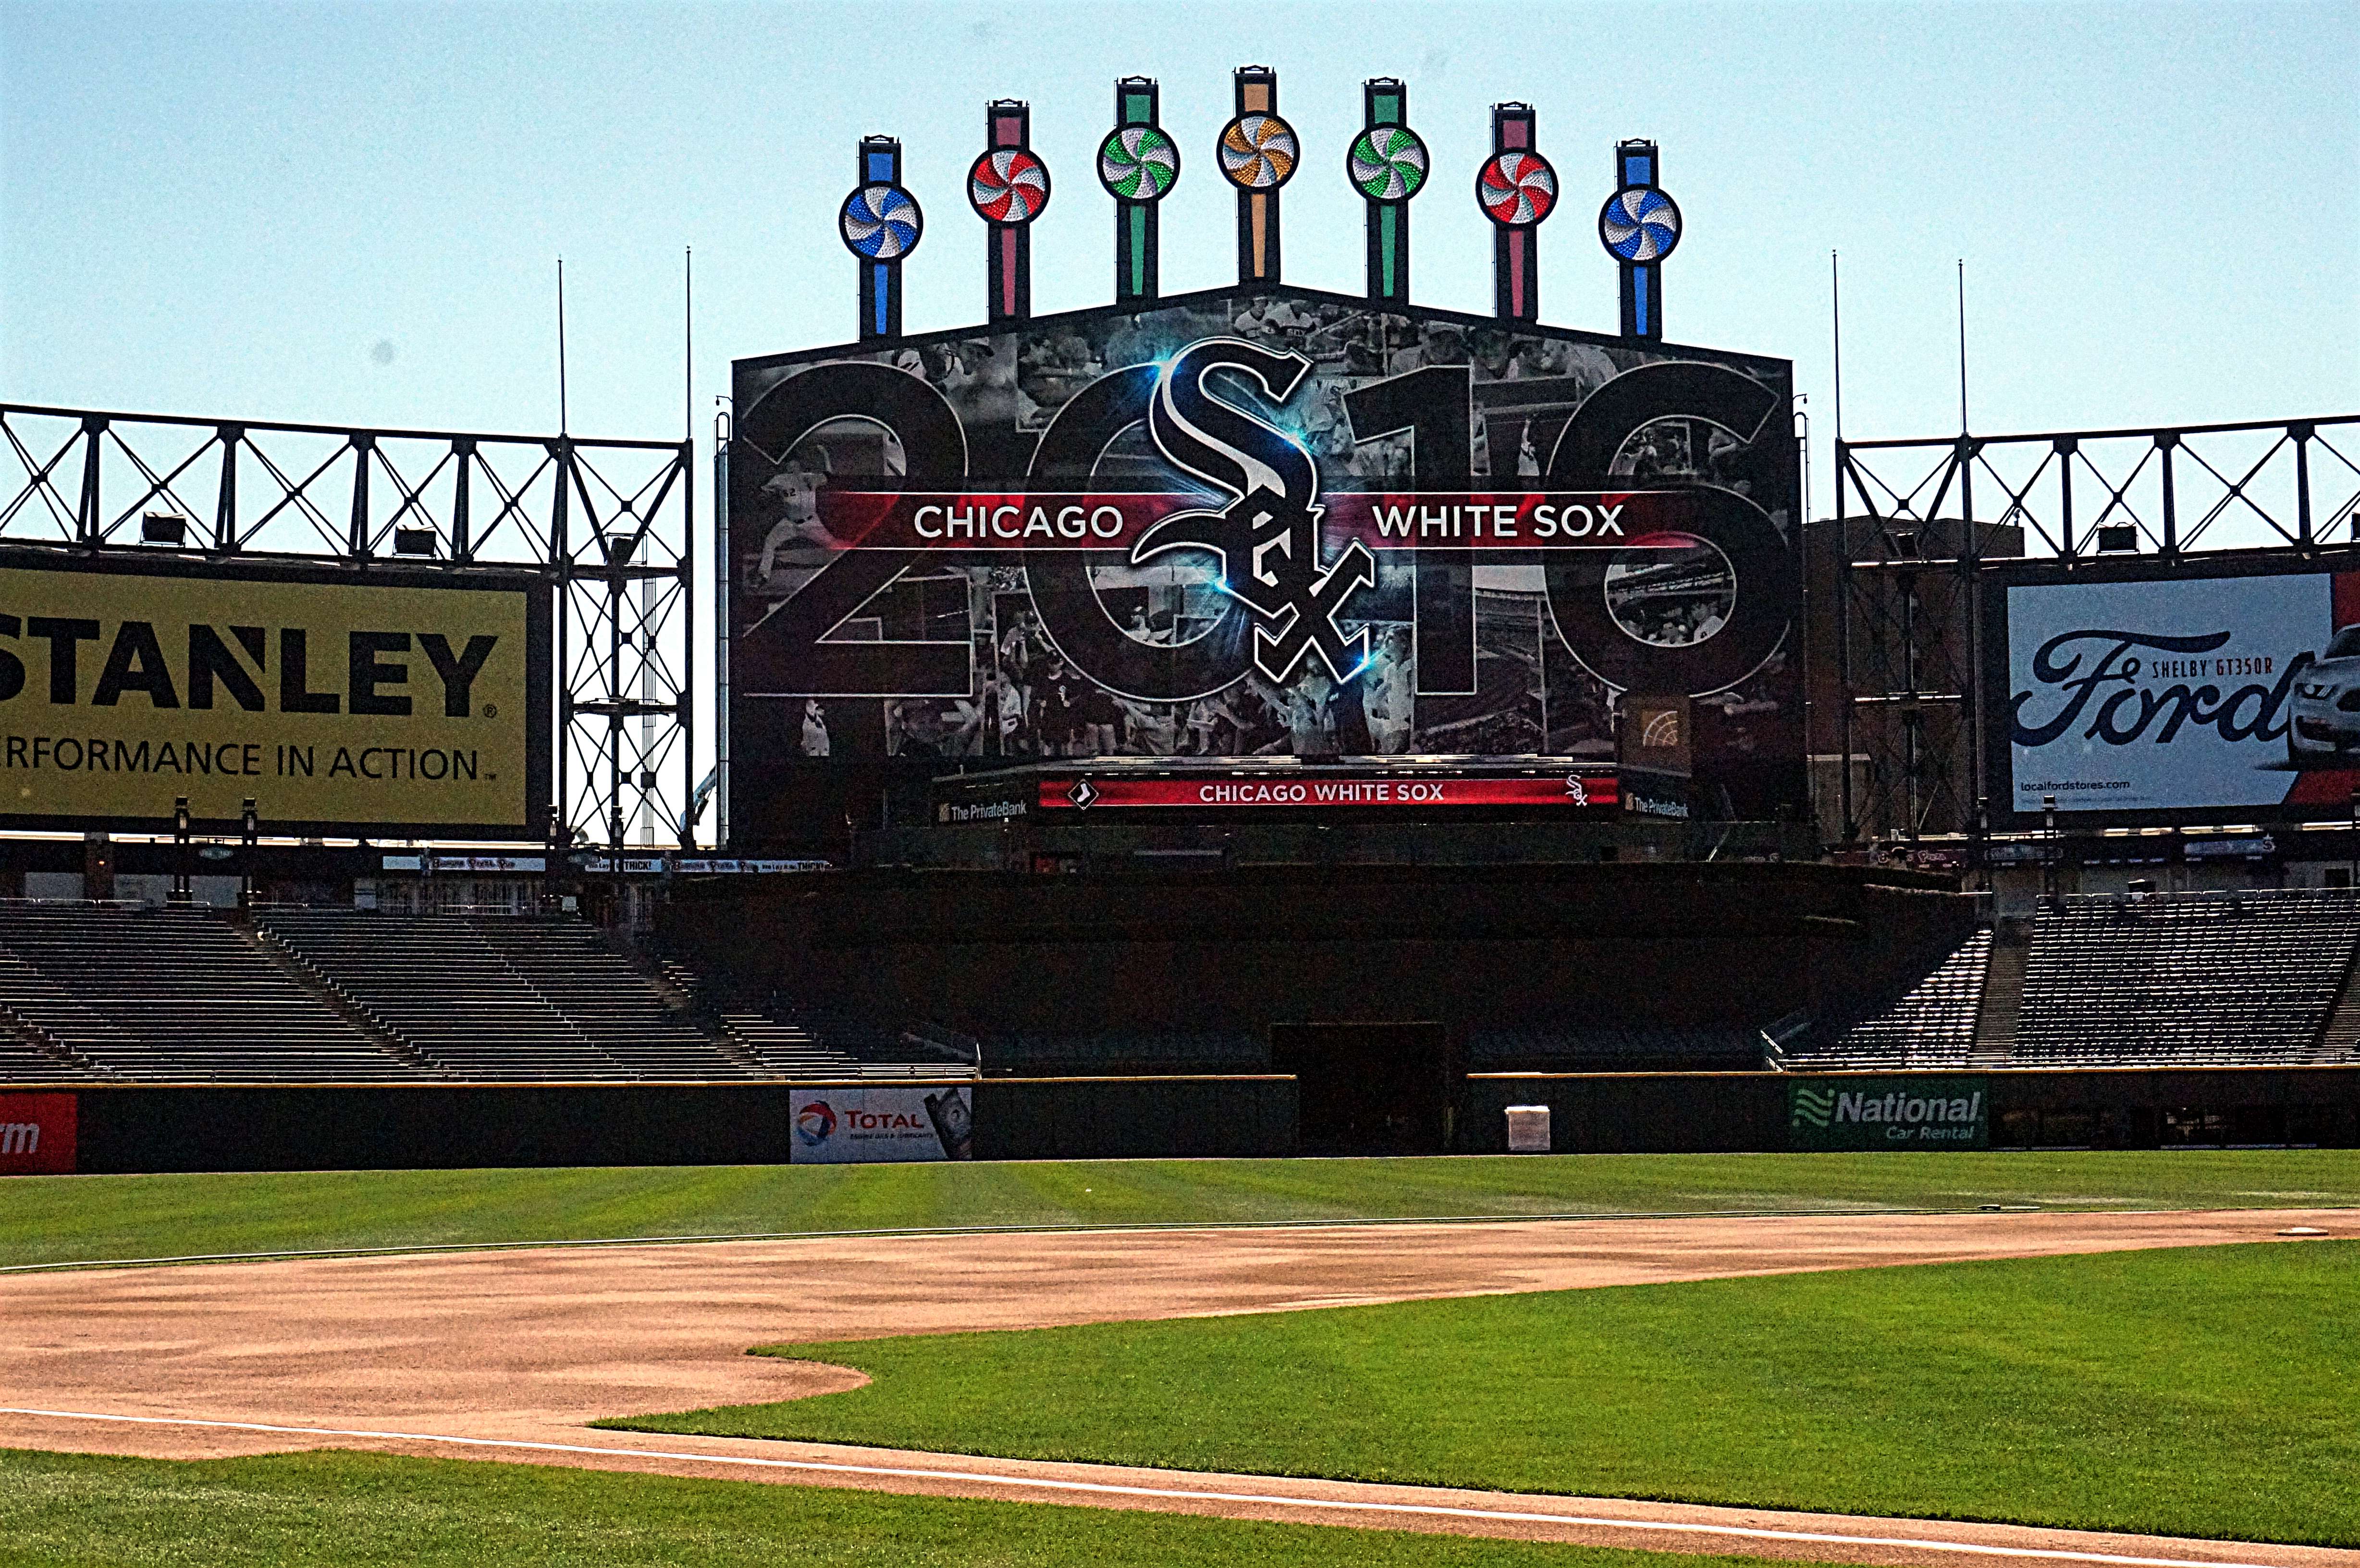 Opening Weekend at U.S. Cellular – What you need to know…